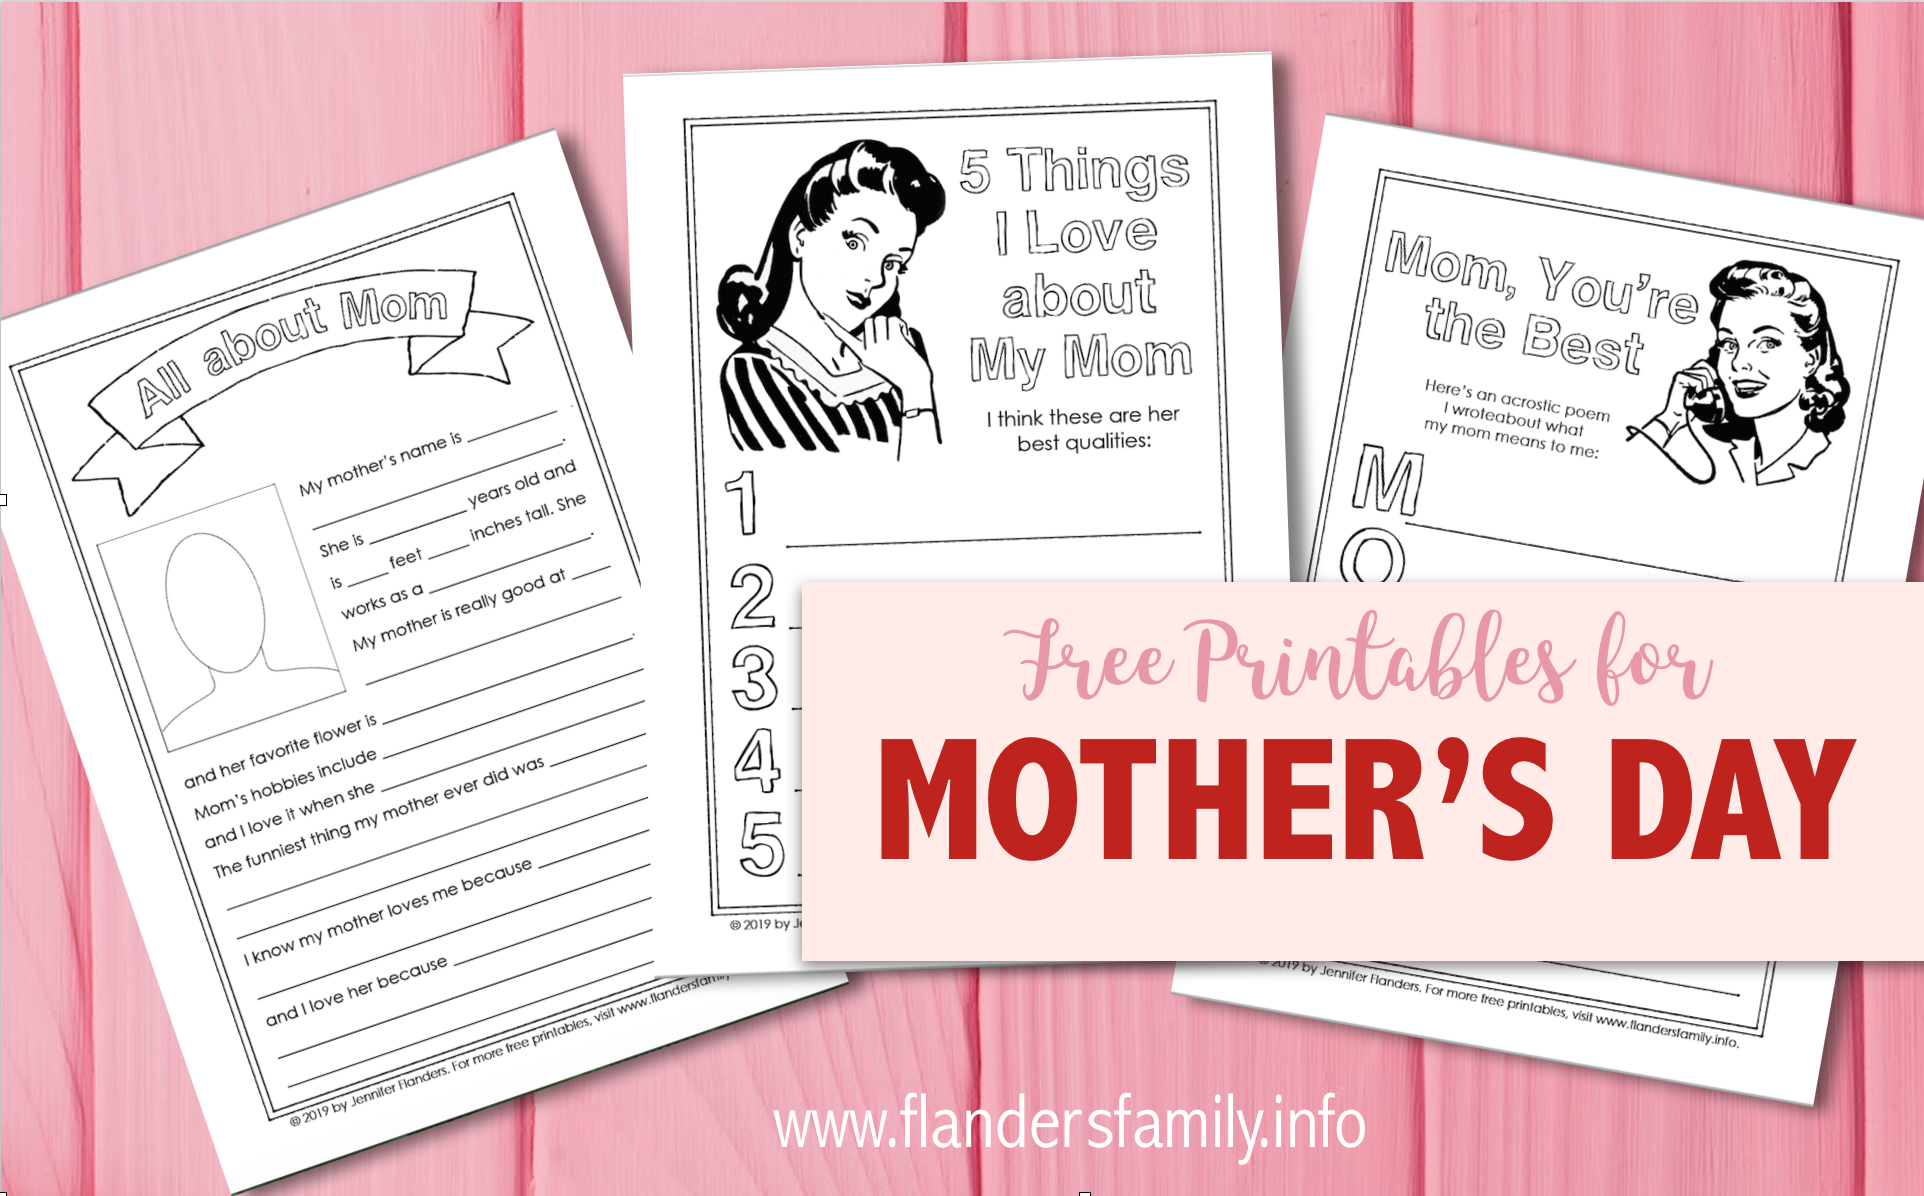 Mother's Day Printables from Flanders Family